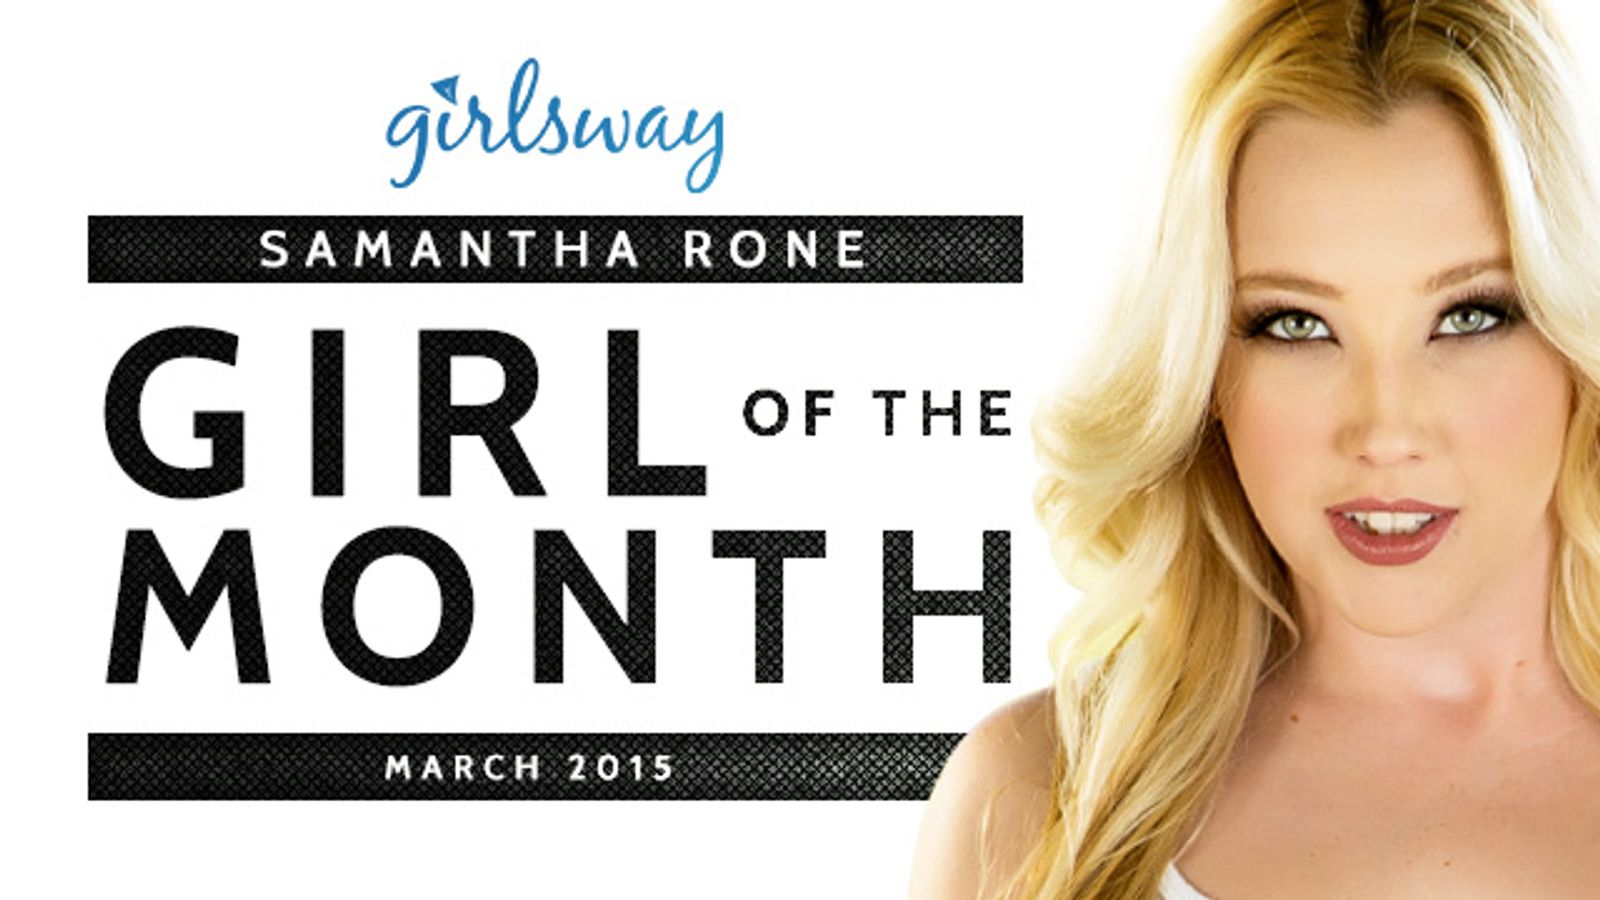 Samantha Rone is Girlsway Girl of the Month of March